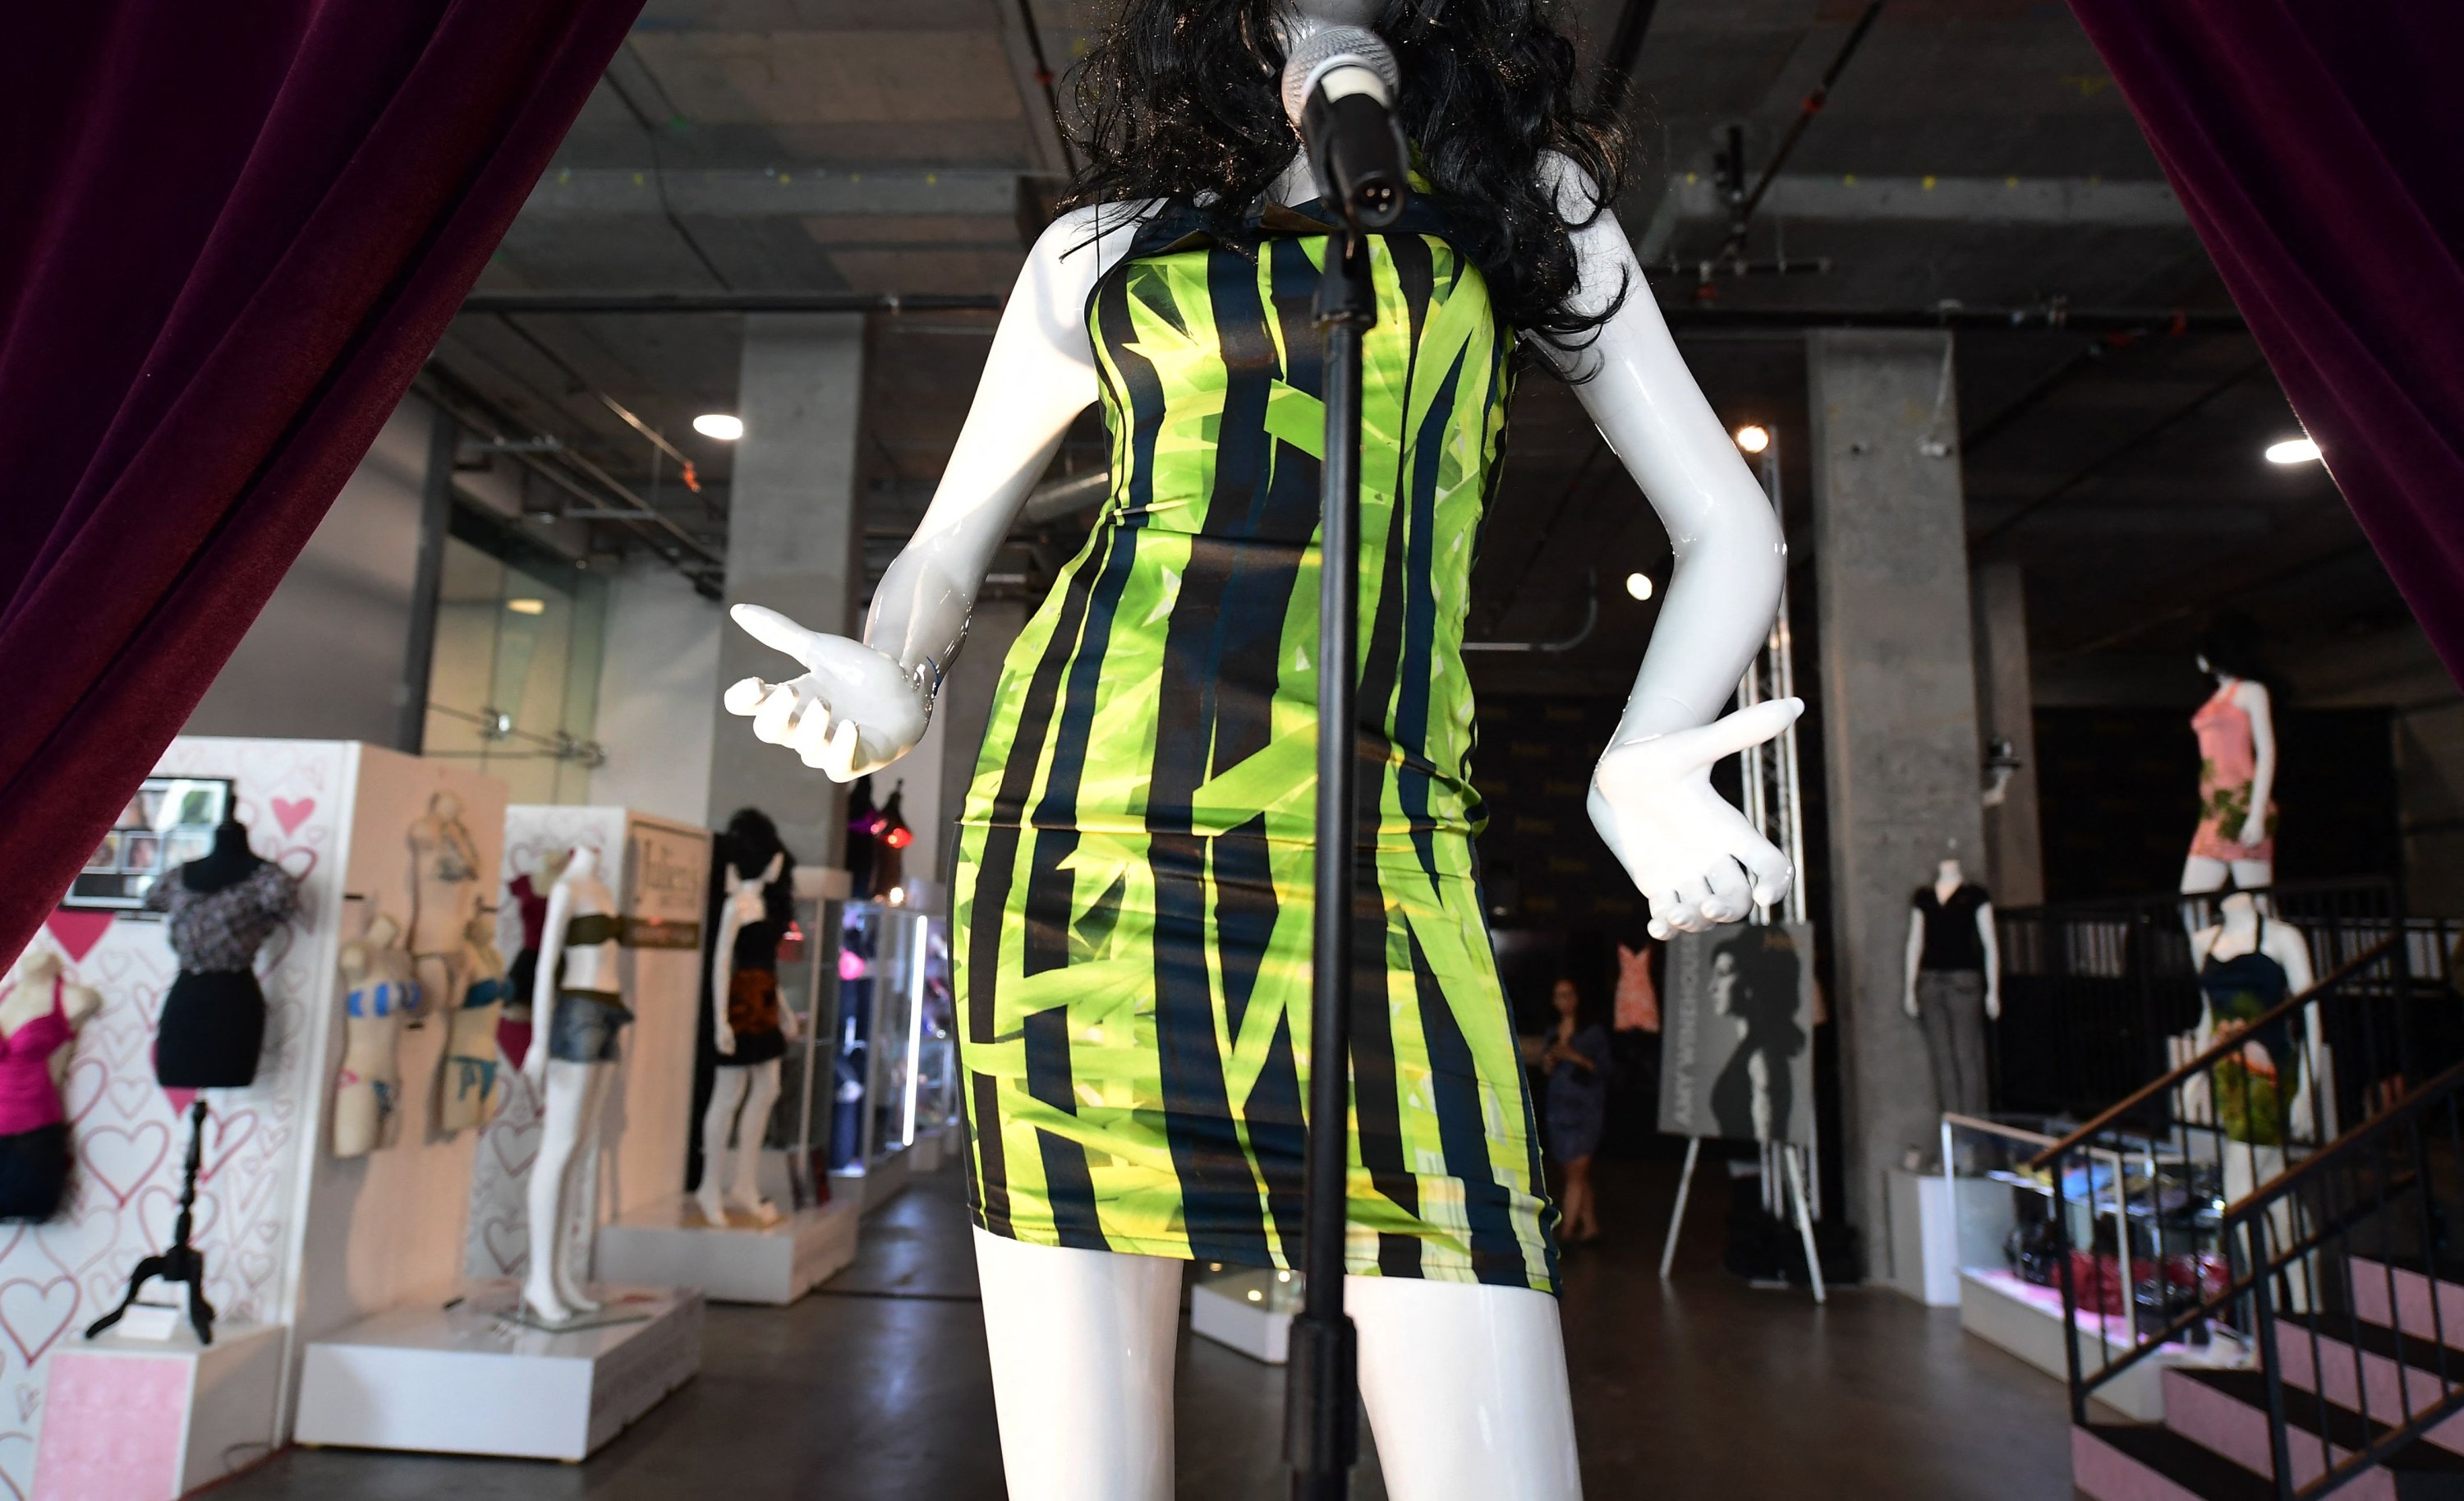 The dress worn by Amy Winehouse in her final performance during the 2011 Summer Festival Tour for a concert performance in Belgrade is displayed at Julien's Auctions in Beverly Hills, California, U.S., Nov. 1, 2021. (AFP File Photo)